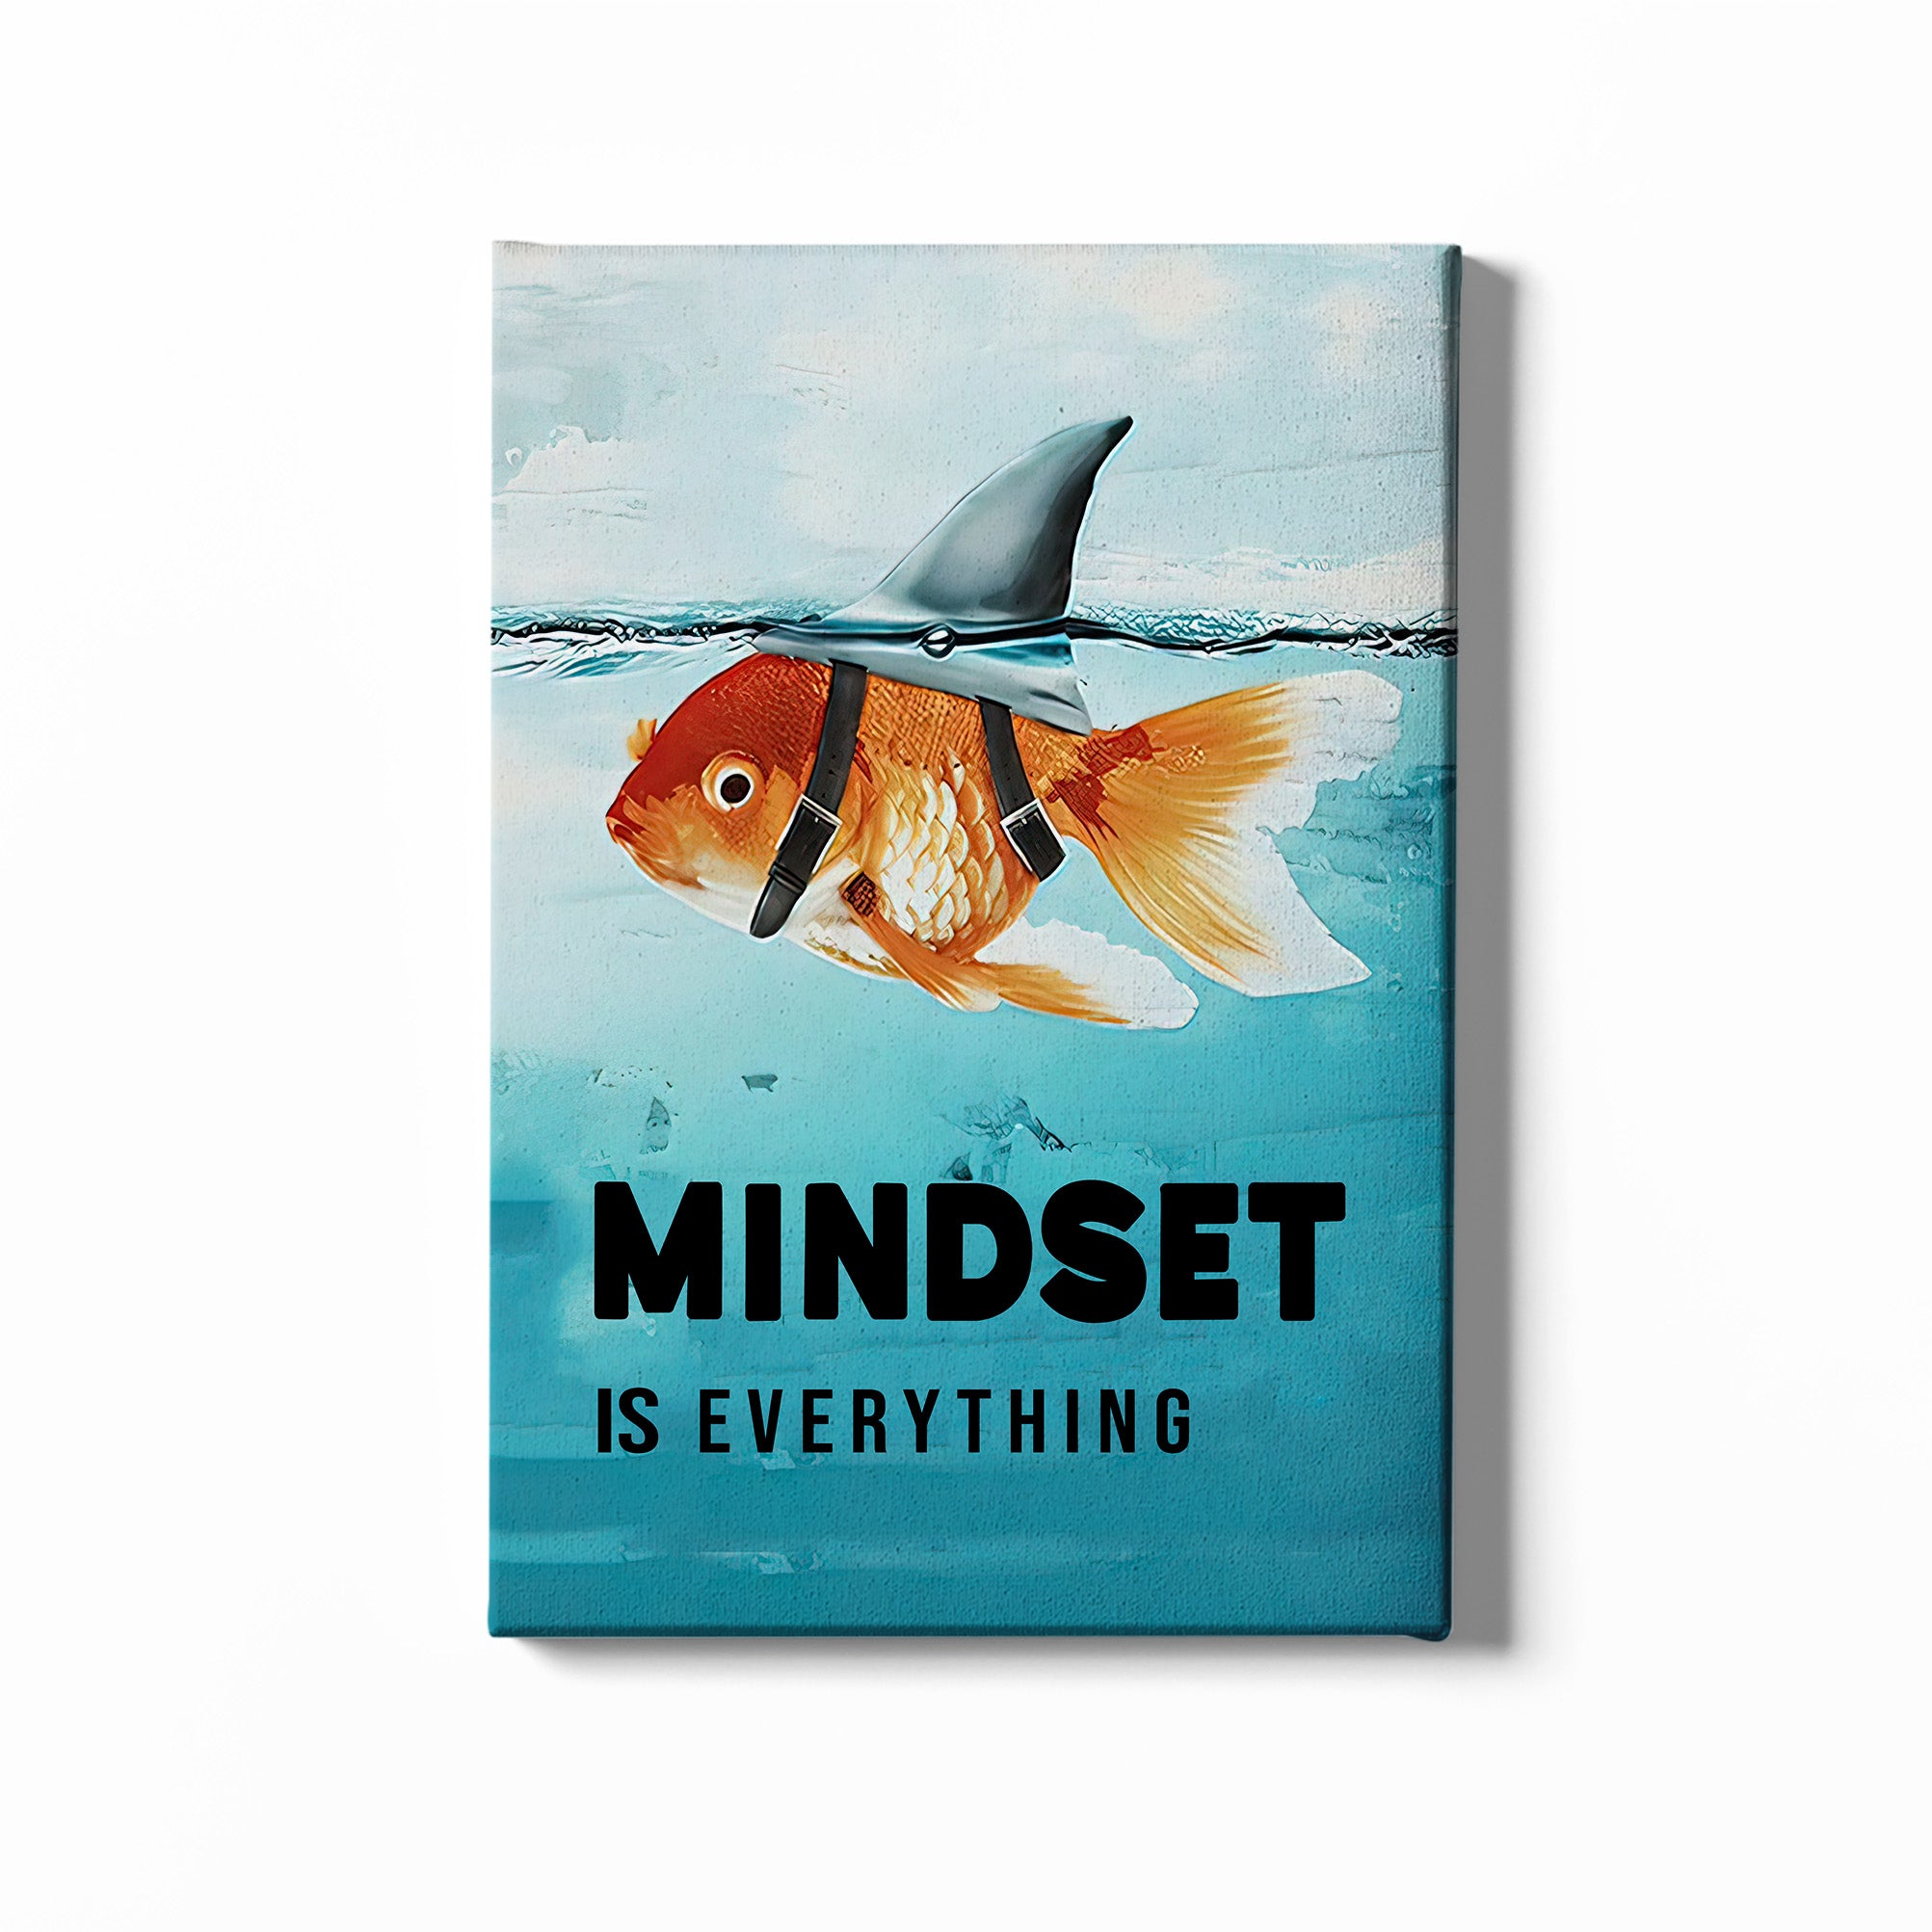 Framed Wall Art, Mindset Is Everything Poster, Motivation Quotes, Inspirational Quotes, Goldfish, Shark, Living Room Decorations